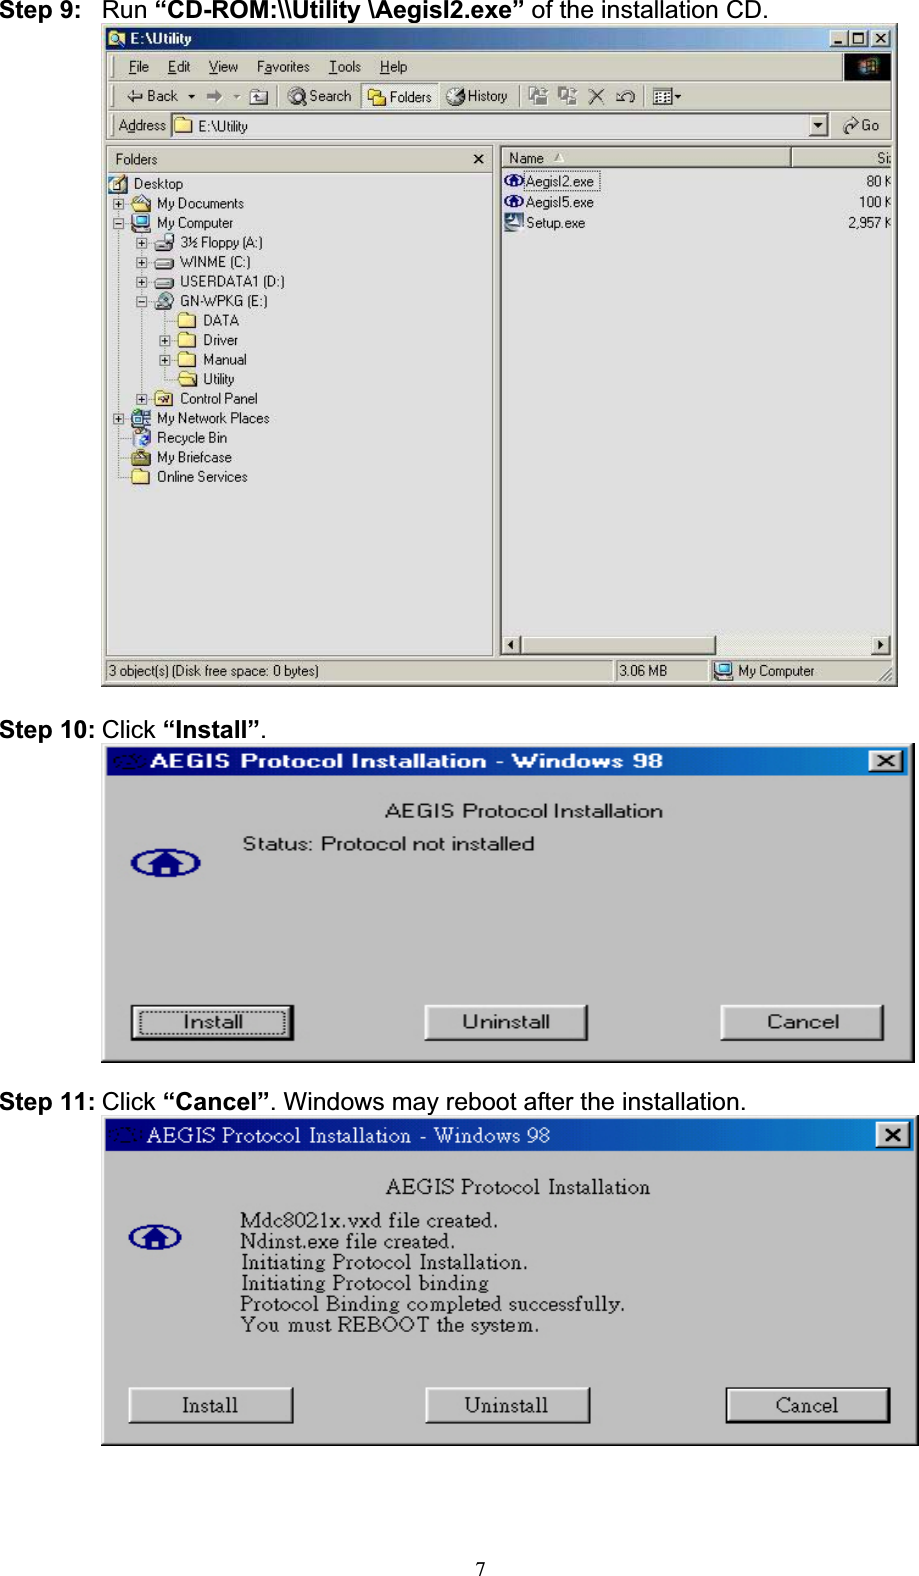 7Step 9: Run “CD-ROM:\\Utility \AegisI2.exe” of the installation CD. Step 10: Click “Install”.Step 11: Click “Cancel”. Windows may reboot after the installation. 